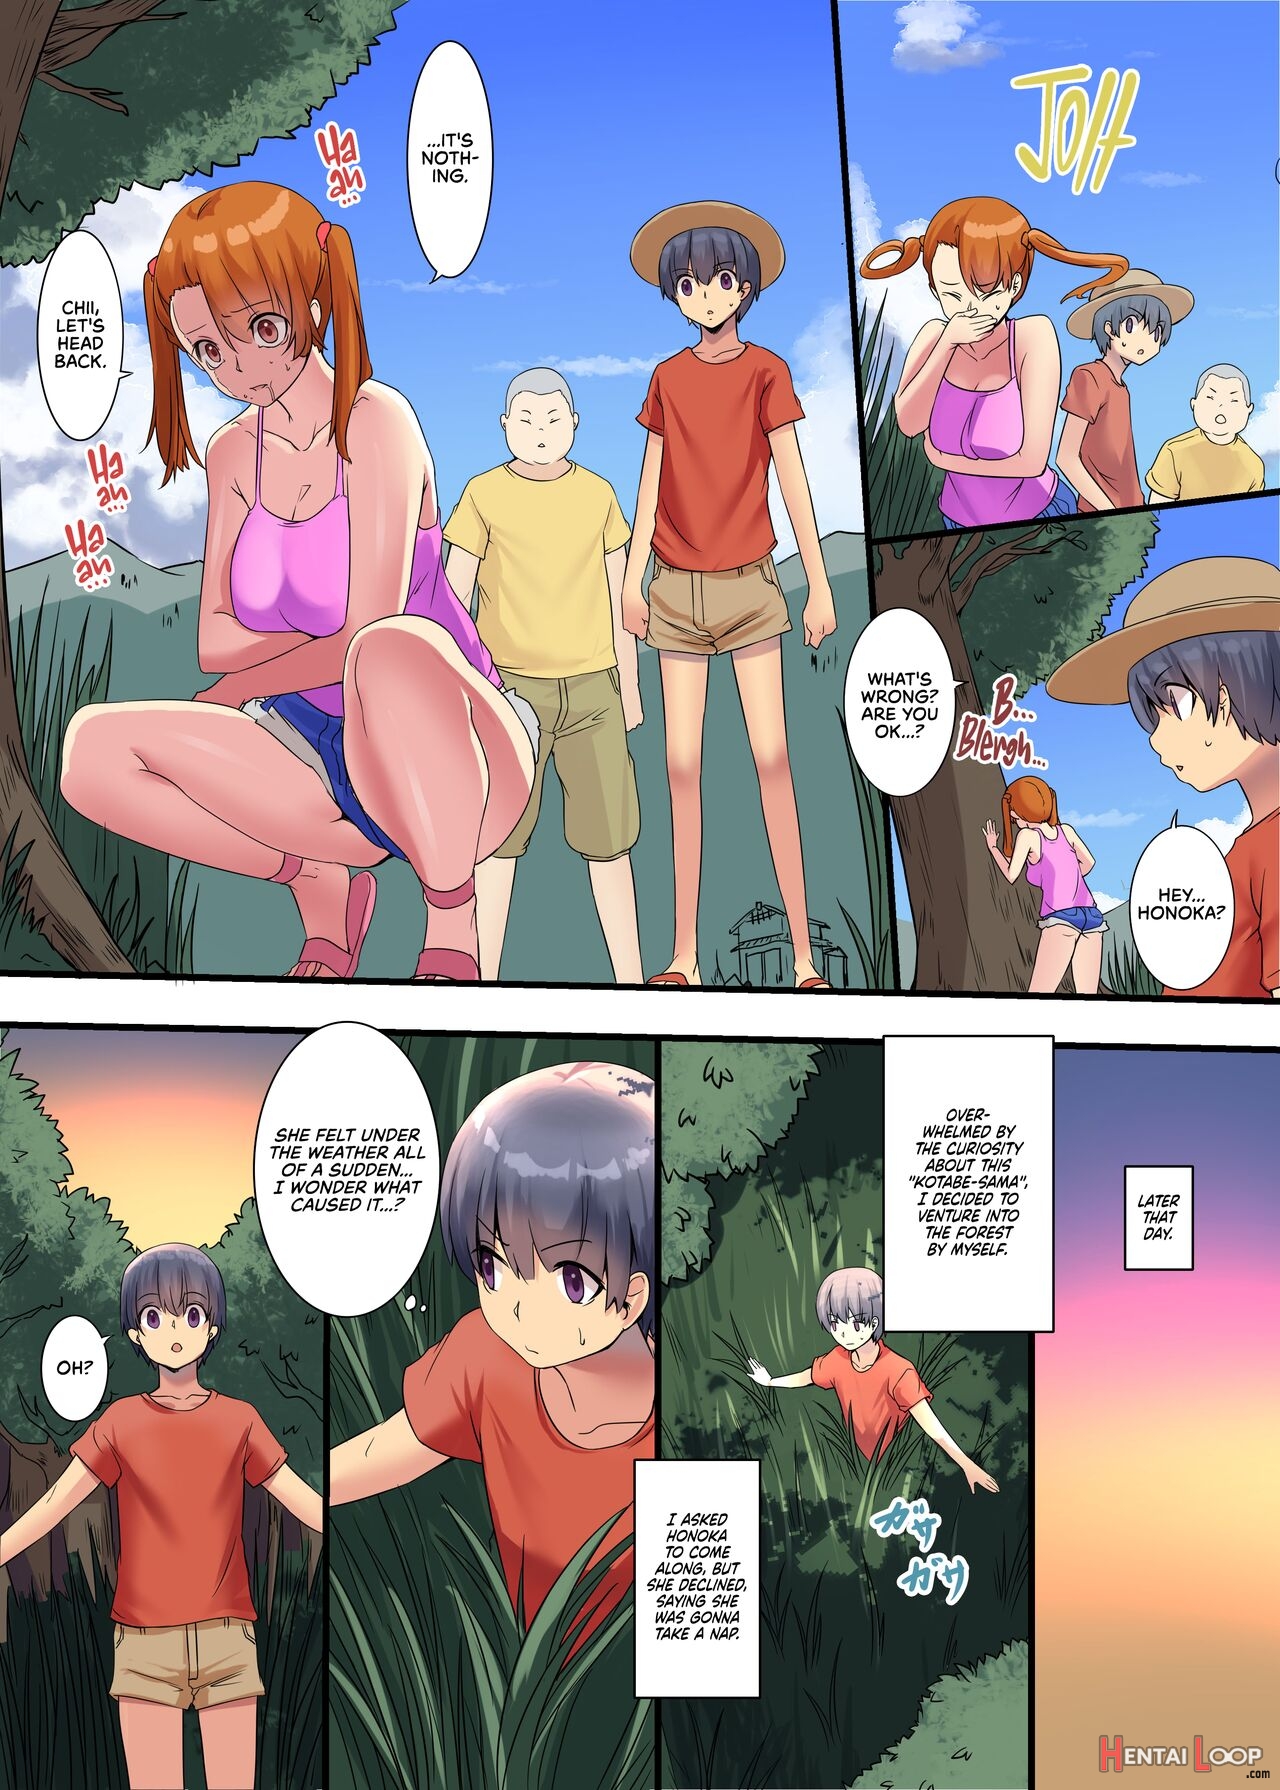 Adultery Tales With The Bizarre ~kotabe-sama Of A Remote Island Arc~ page 7